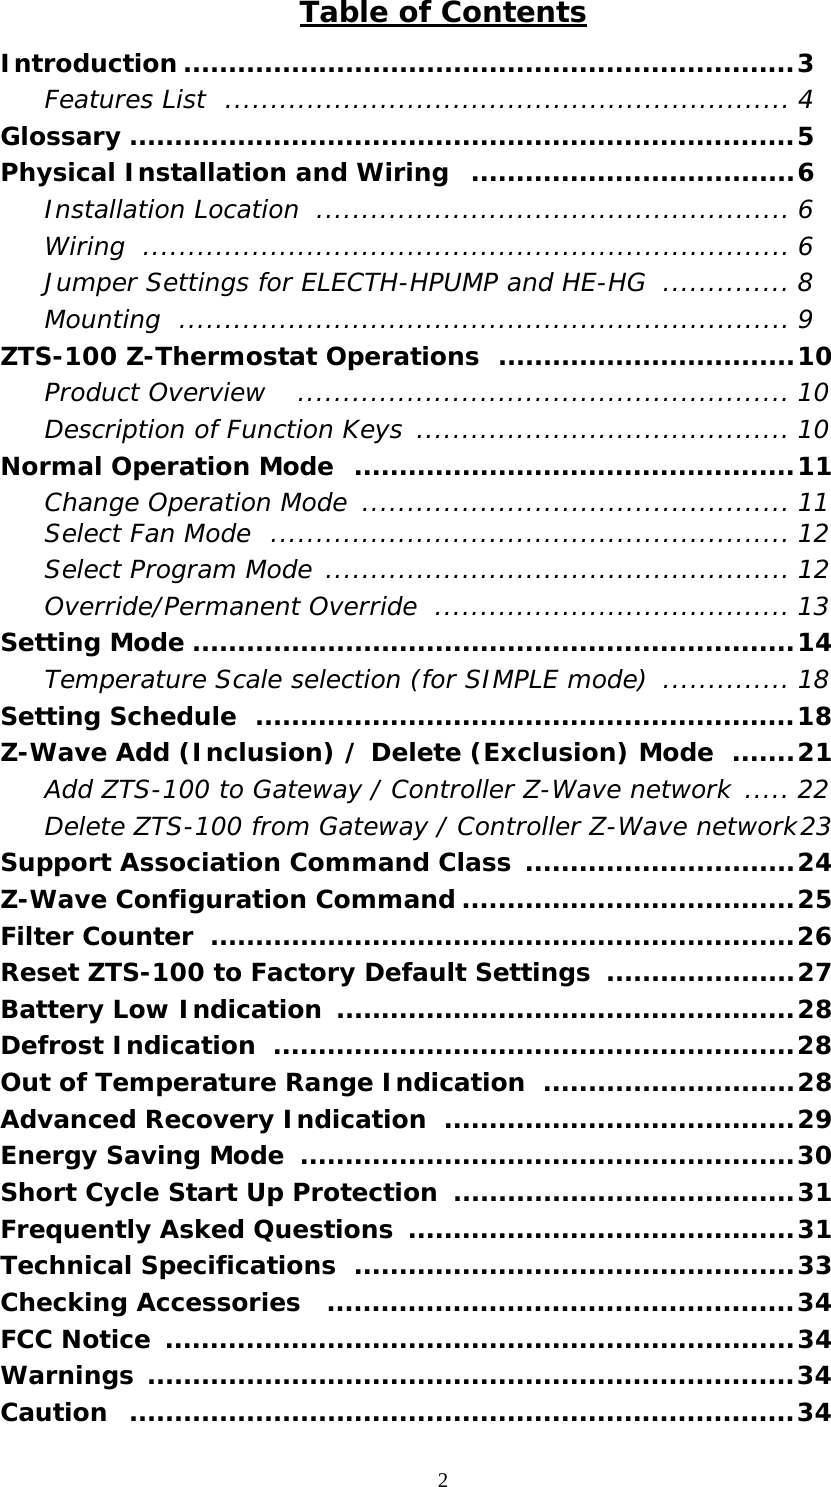 2  Table of Contents Introduction ....................................................................3  Features List .............................................................. 4 Glossary ..........................................................................5 Physical Installation and Wiring  ....................................6  Installation Location .................................................... 6  Wiring ....................................................................... 6   Jumper Settings for ELECTH-HPUMP and HE-HG  .............. 8  Mounting ................................................................... 9 ZTS-100 Z-Thermostat Operations  .................................10  Product Overview   ...................................................... 10   Description of Function Keys ......................................... 10 Normal Operation Mode  .................................................11   Change Operation Mode  ............................................... 11  Select Fan Mode  ......................................................... 12   Select Program Mode ................................................... 12  Override/Permanent Override  ....................................... 13 Setting Mode ...................................................................14  Temperature Scale selection (for SIMPLE mode) .............. 18 Setting Schedule  ............................................................18 Z-Wave Add (Inclusion) / Delete (Exclusion) Mode  .......21   Add ZTS-100 to Gateway / Controller Z-Wave network ..... 22   Delete ZTS-100 from Gateway / Controller Z-Wave network 23 Support Association Command Class ..............................24 Z-Wave Configuration Command .....................................25 Filter Counter  .................................................................26 Reset ZTS-100 to Factory Default Settings  .....................27 Battery Low Indication ...................................................28 Defrost Indication  ..........................................................28 Out of Temperature Range Indication  ............................28 Advanced Recovery Indication  .......................................29 Energy Saving Mode  .......................................................30 Short Cycle Start Up Protection  ......................................31 Frequently Asked Questions  ...........................................31 Technical Specifications  .................................................33 Checking Accessories  ....................................................34 FCC Notice  ......................................................................34 Warnings ........................................................................34 Caution ..........................................................................34 